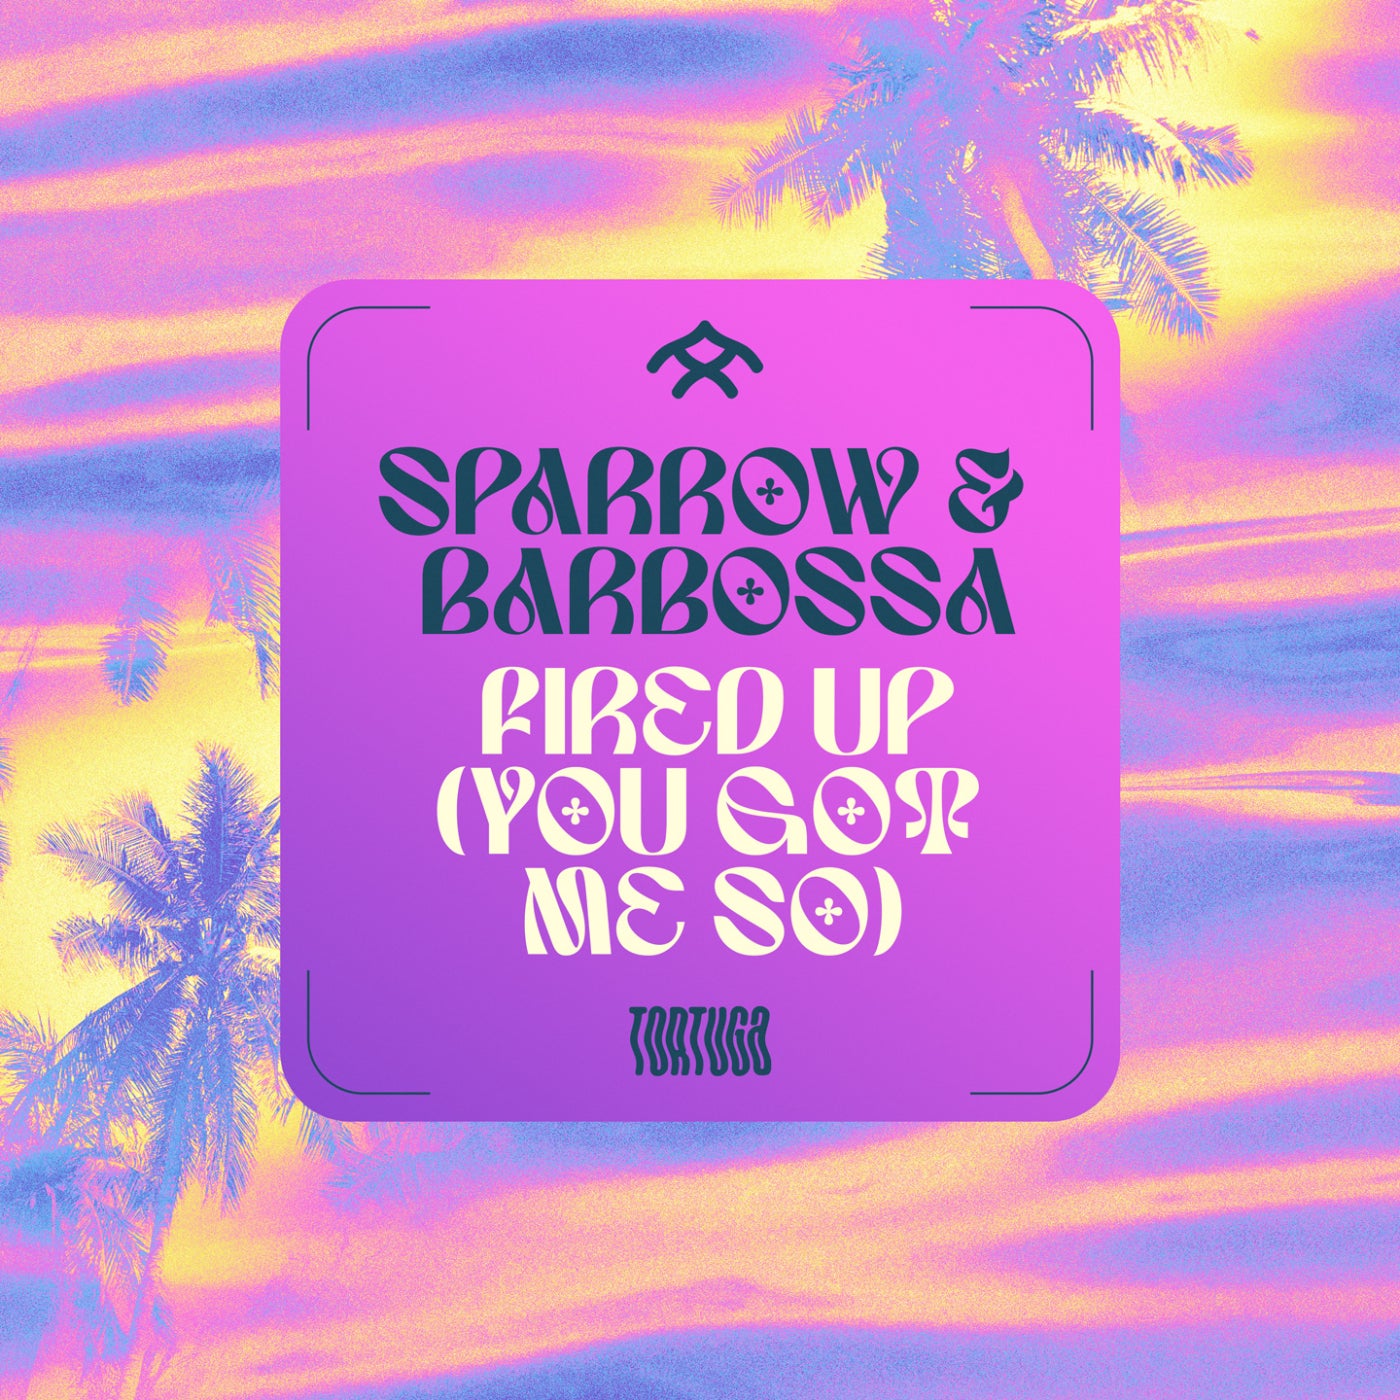 image cover: Sparrow & Barbossa - Fired Up (You Got Me So) on Tortuga